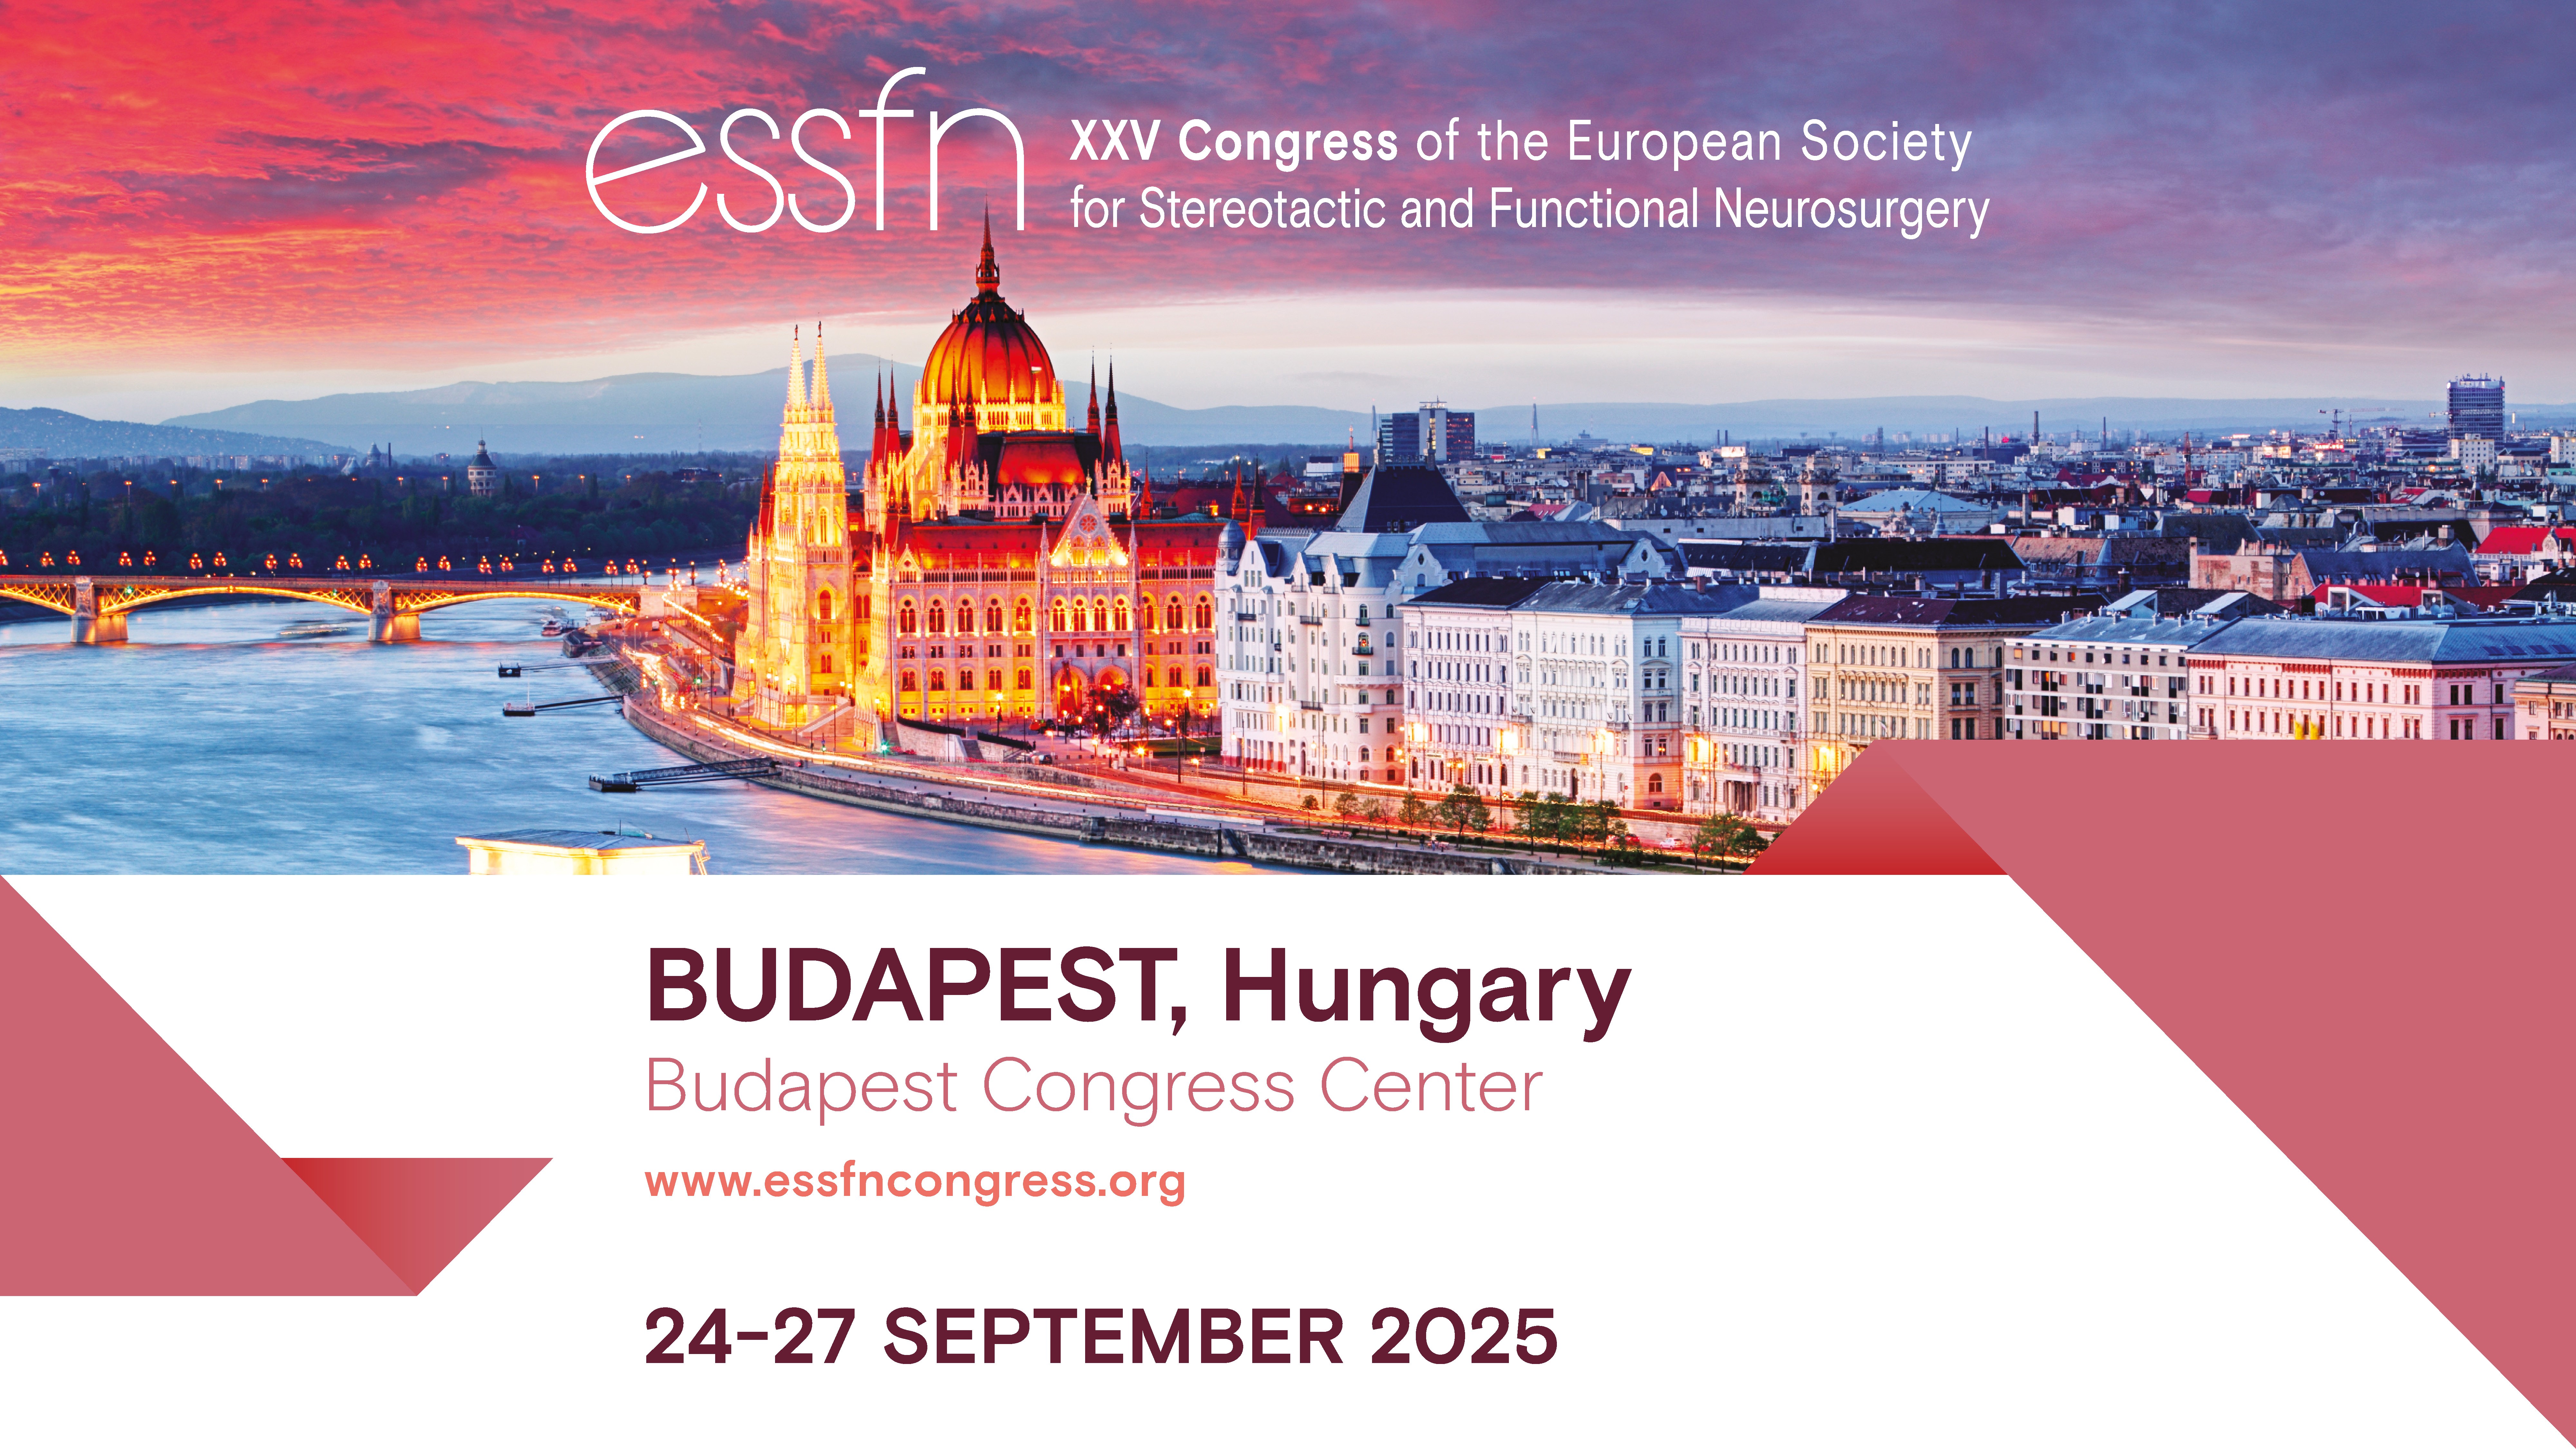 XXV Congress of the European Society for Stereotactic and Functional Neurosurgery - ESSFN 2025